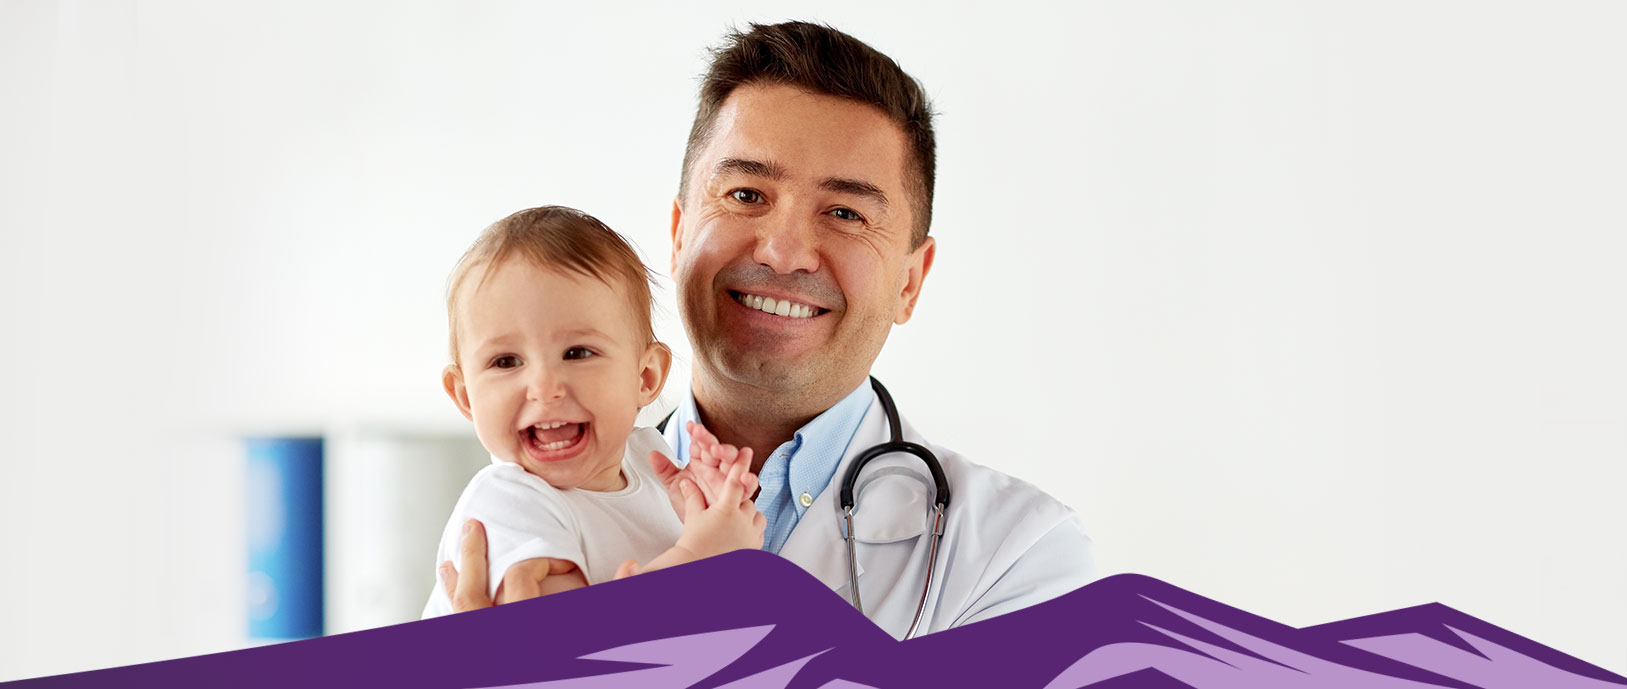 A smiling physician is holding a happy baby